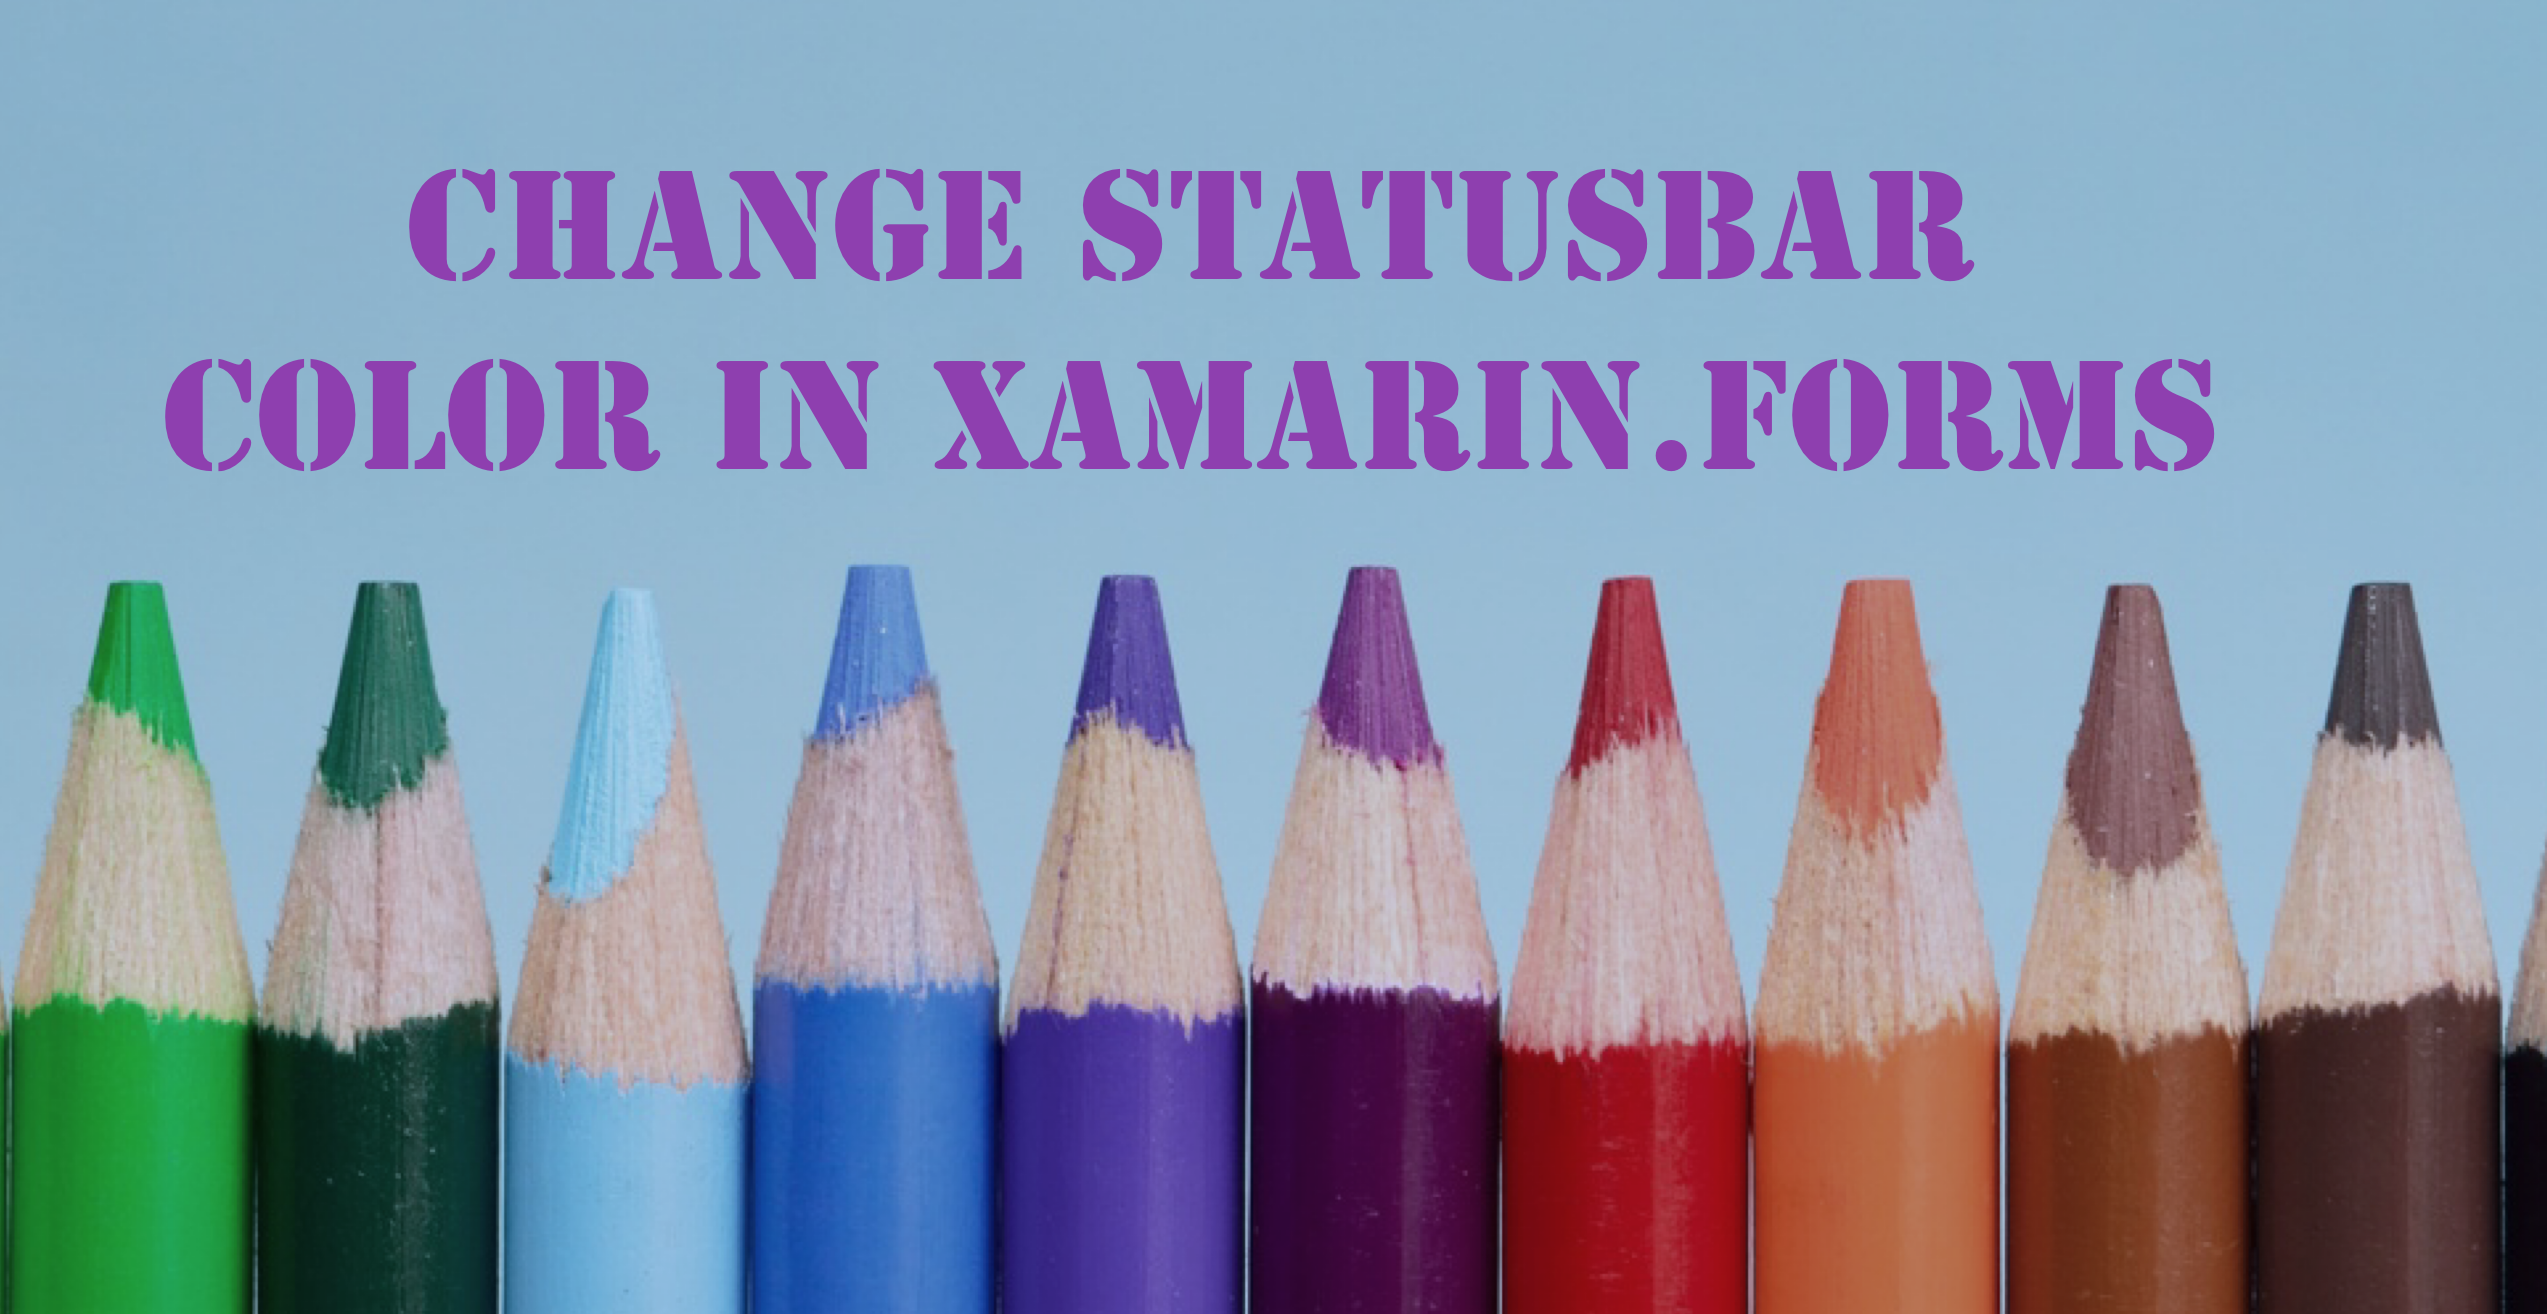 Change the Statusbar color from Xamarin.Forms